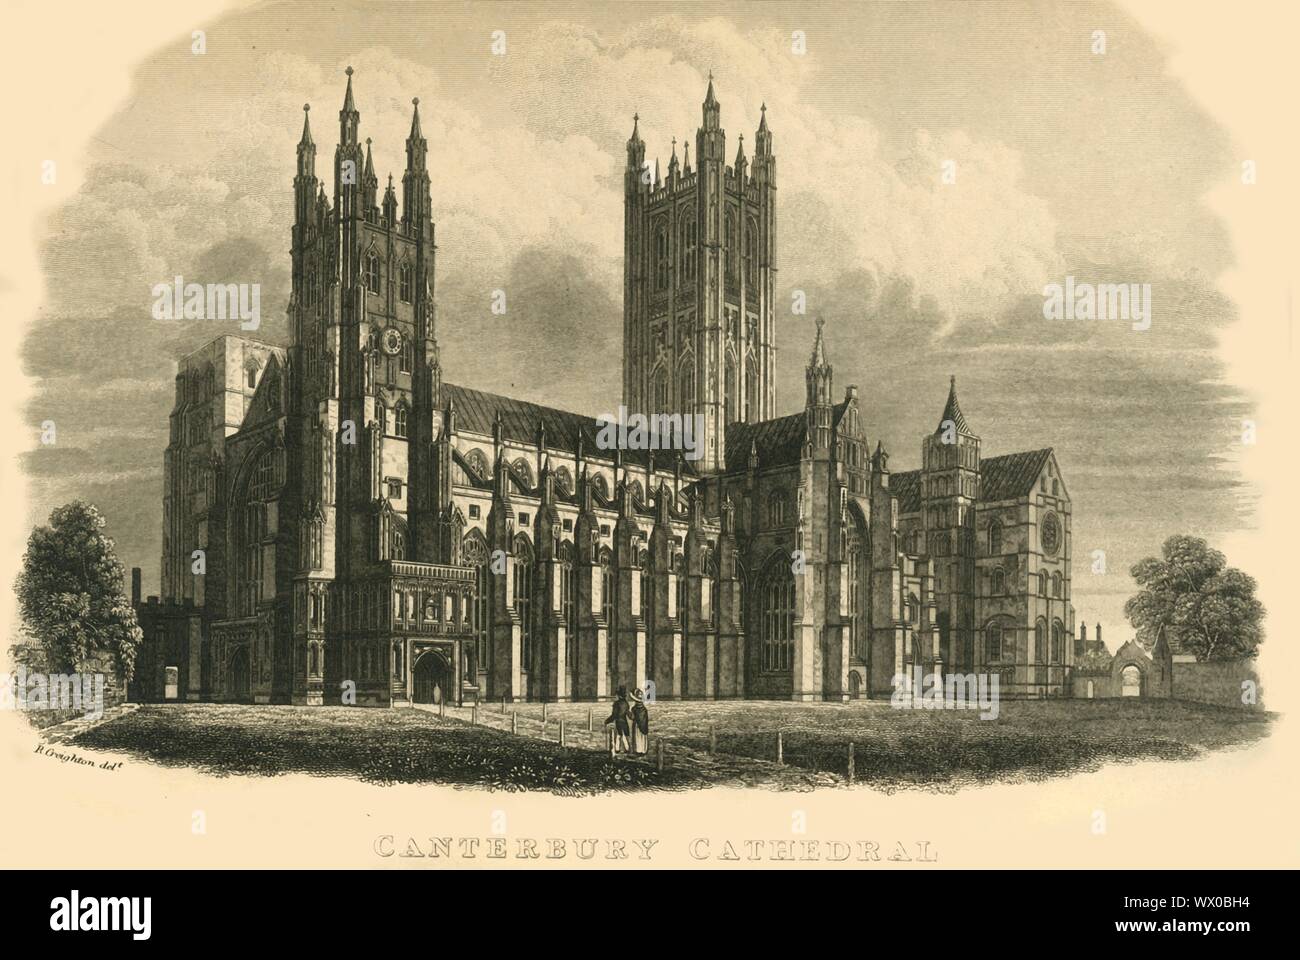 'Canterbury Cathedral', early-mid 19th century. View of the cathedral at Canterbury in Kent which was founded in 597 AD. It was largely rebuilt in Gothic style following a fire in 1174, with extensions to accommodate the flow of pilgrims visiting the shrine of Thomas Becket. Stock Photo